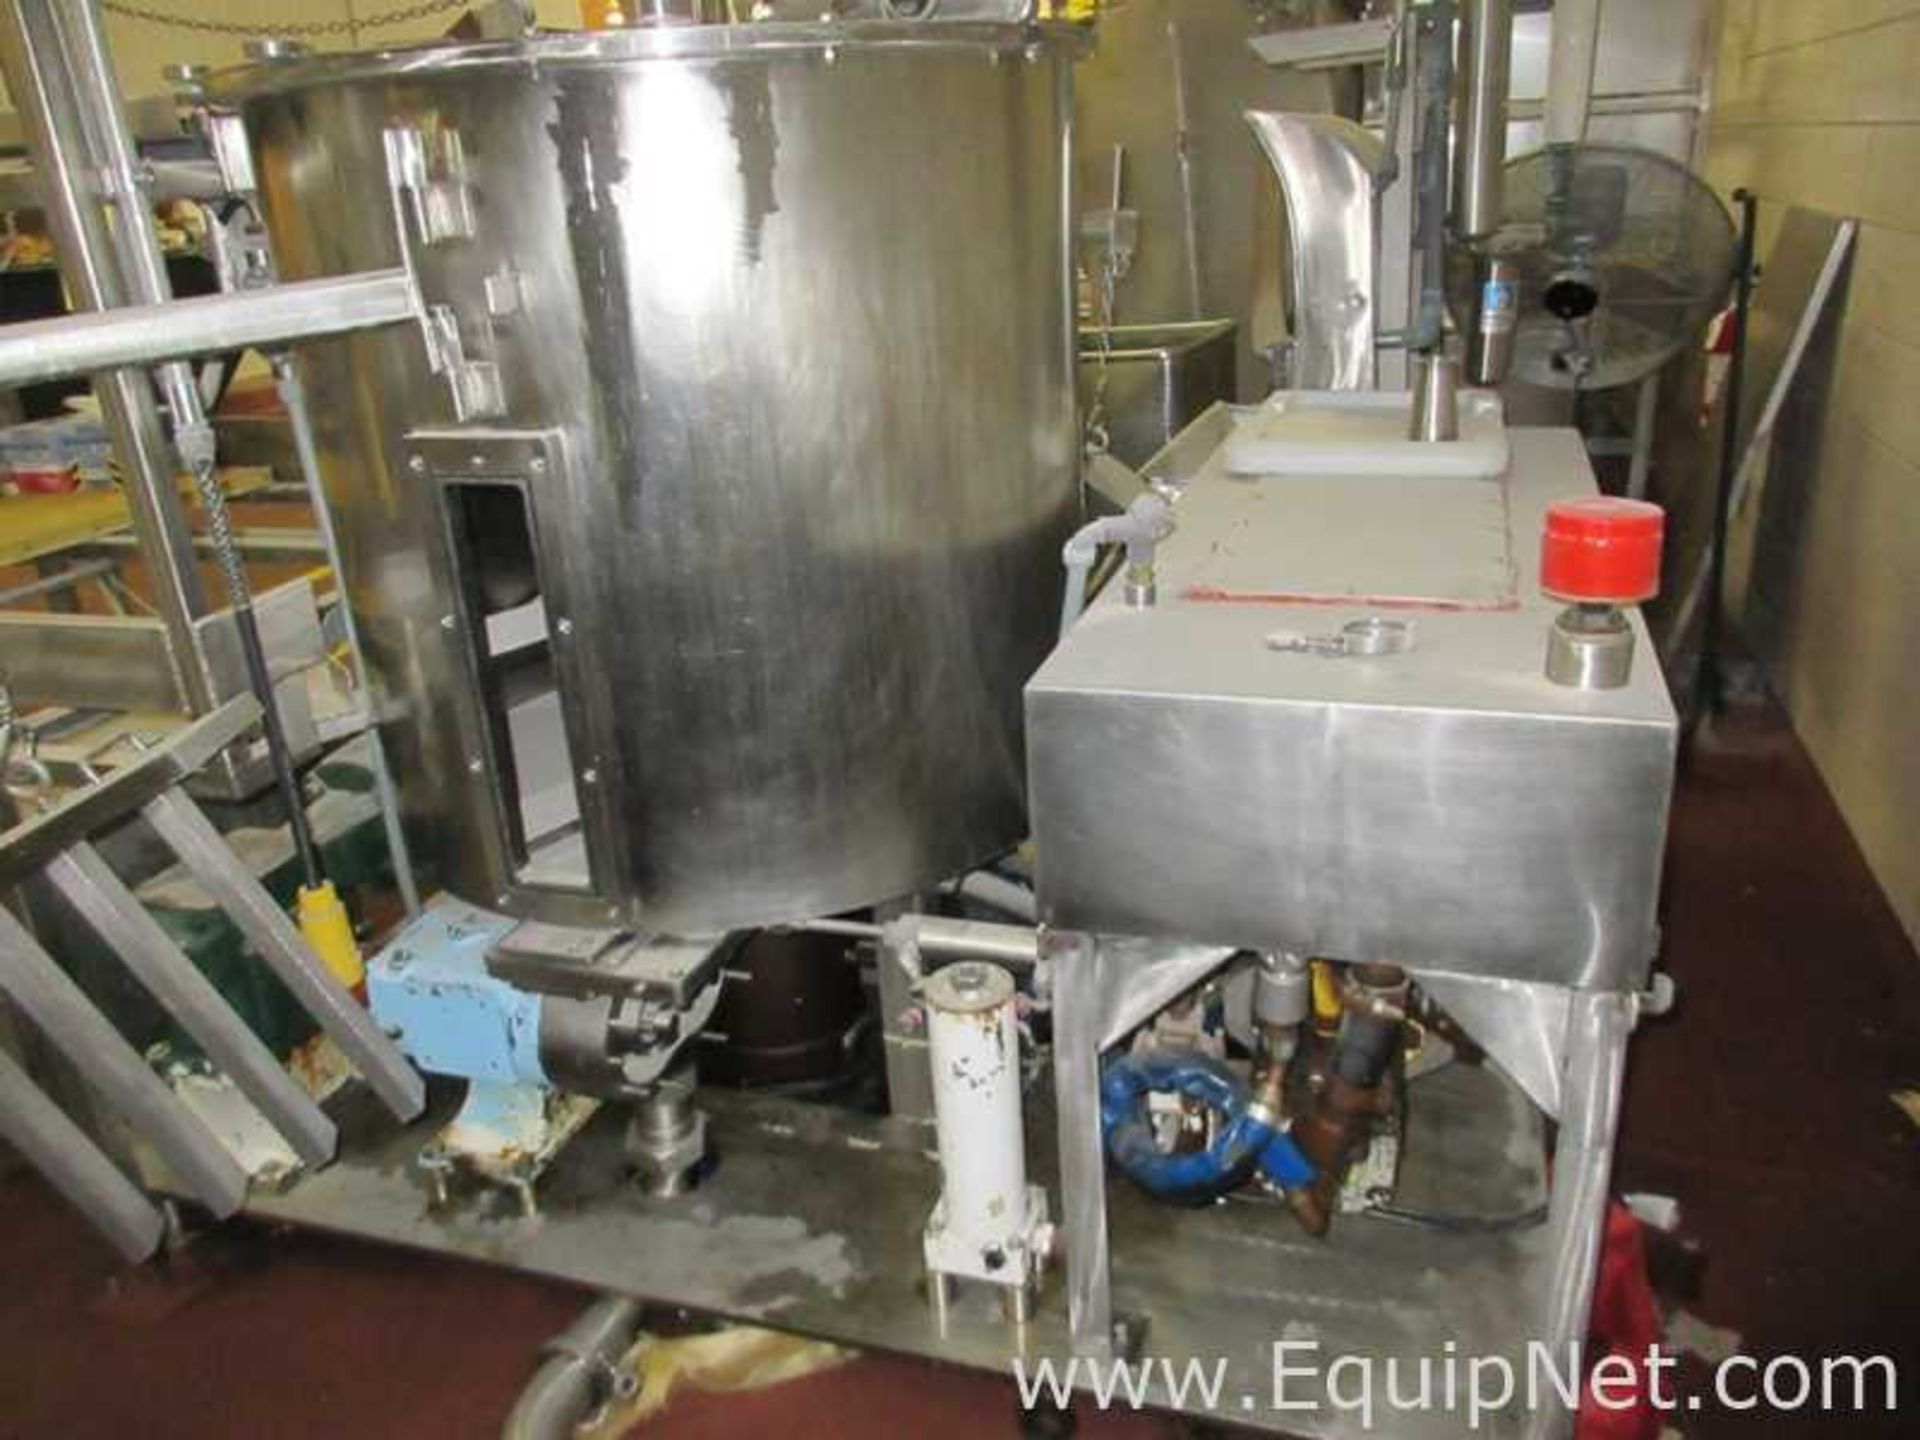 EQUIPNET LISTING #775954; REMOVAL COST: $1,828.00; DESCRIPTION: Approx. 300 Gallon Stainless Steel - Image 2 of 15